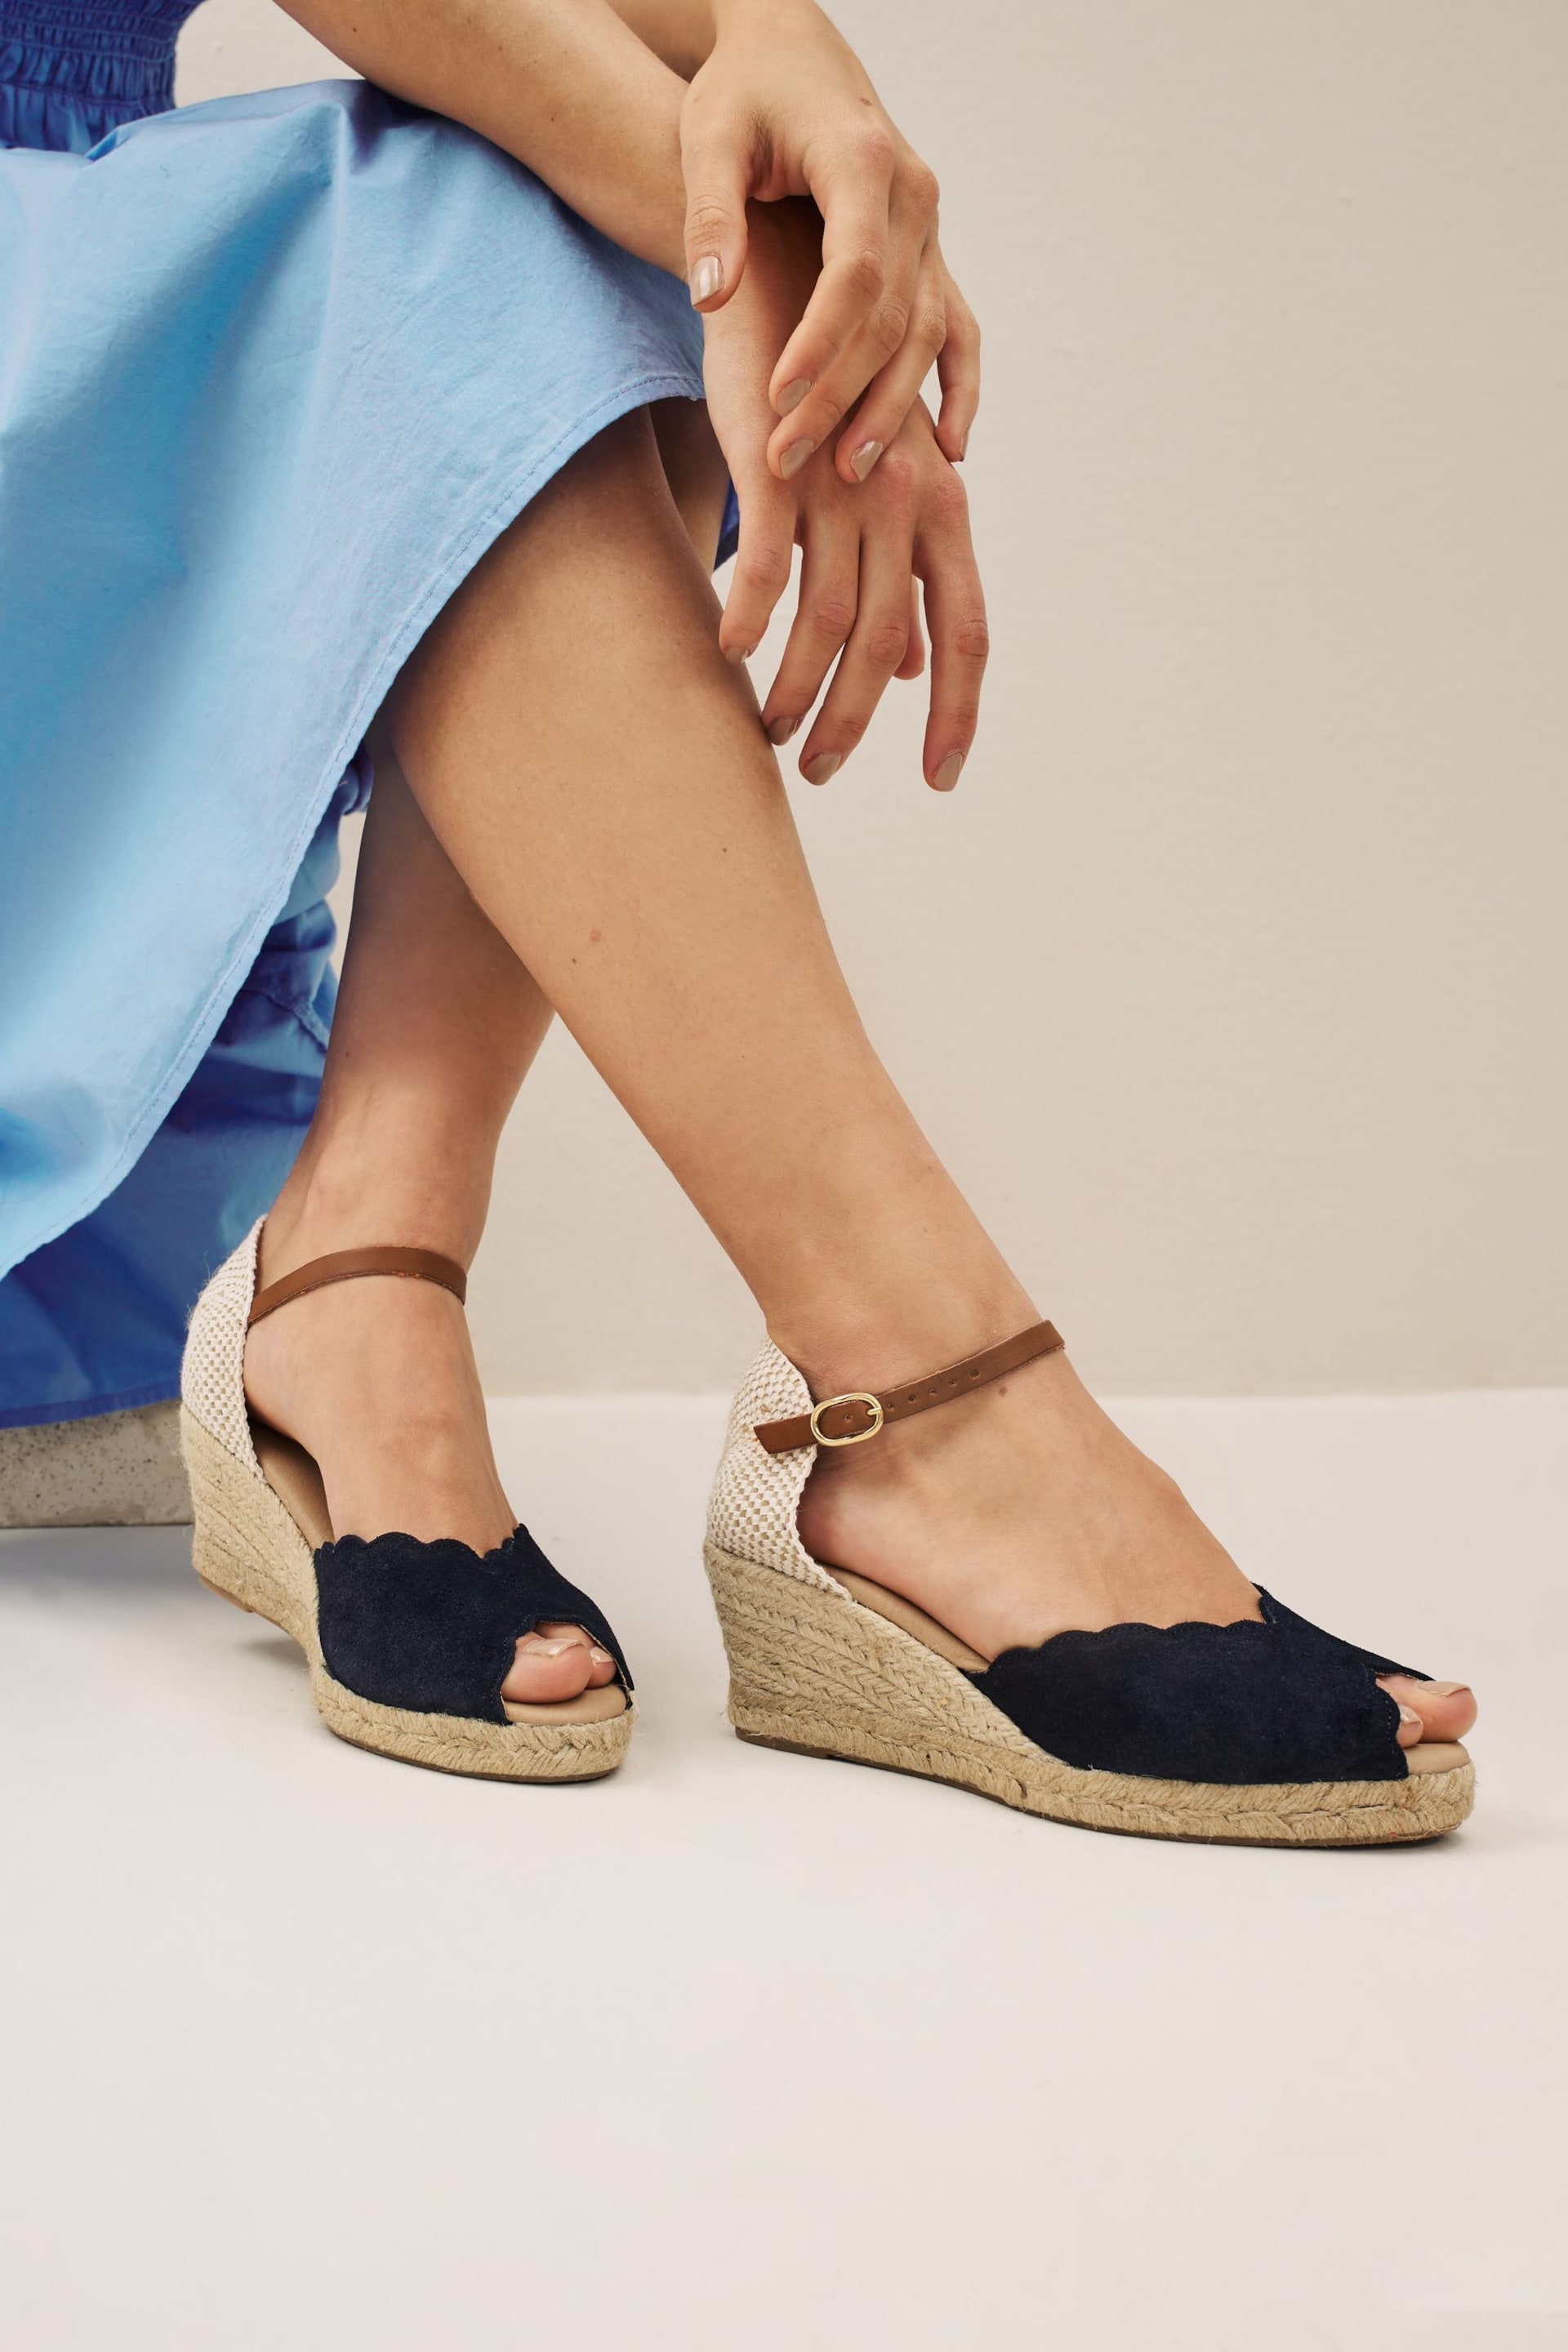 Navy Blue Scallop Peep Toe Wedges - Image 1 of 6